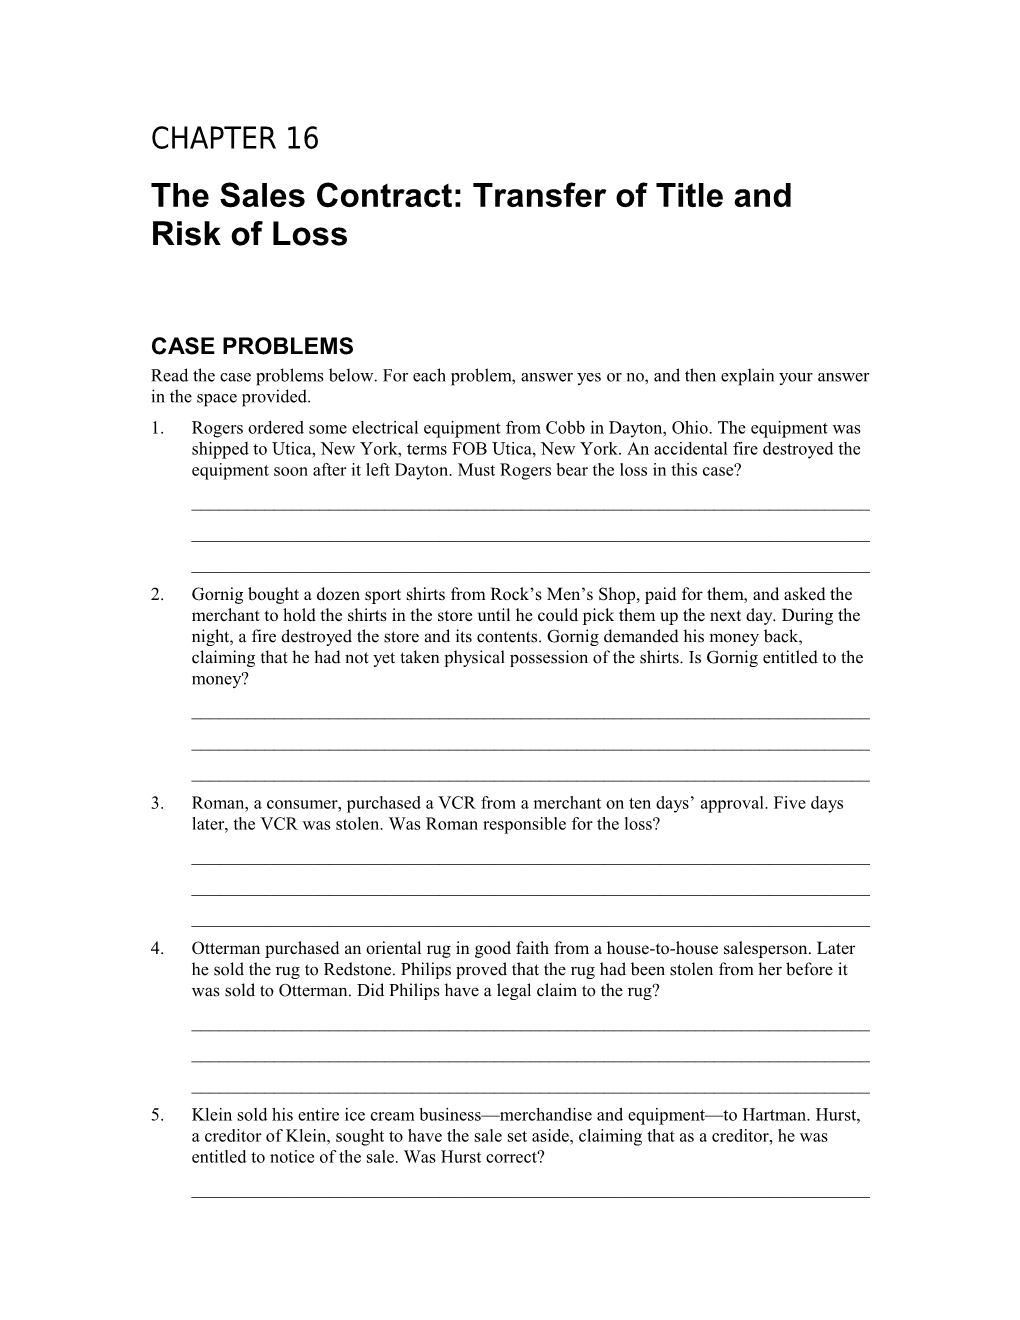 The Sales Contract: Transfer of Title and Risk of Loss